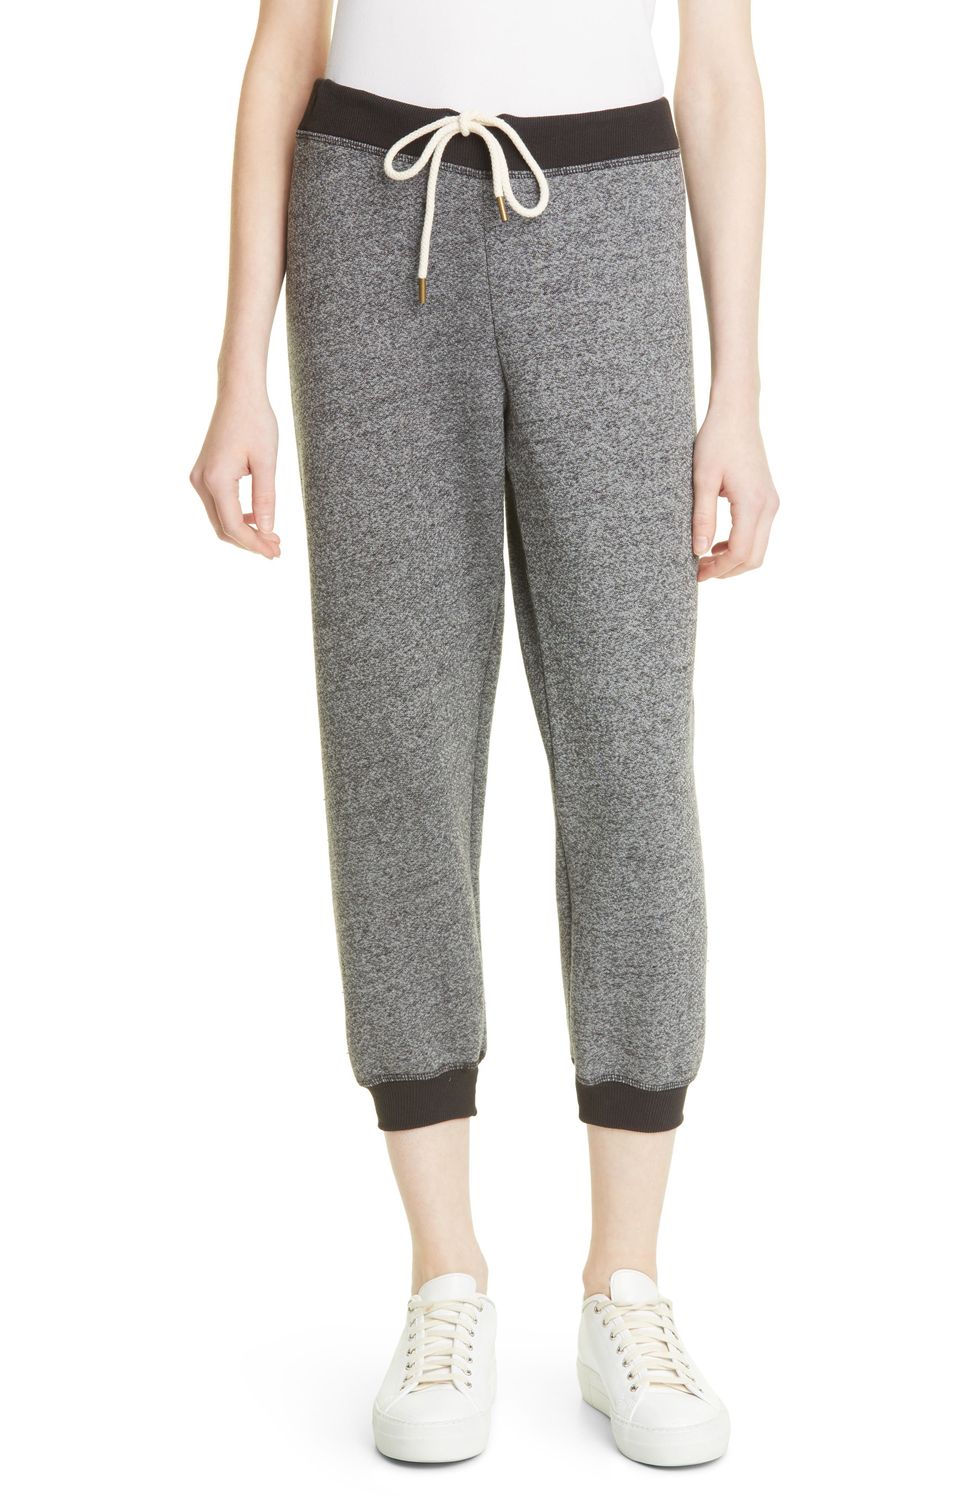 The Crop Sweatpants in Heathered Black at Nordstrom